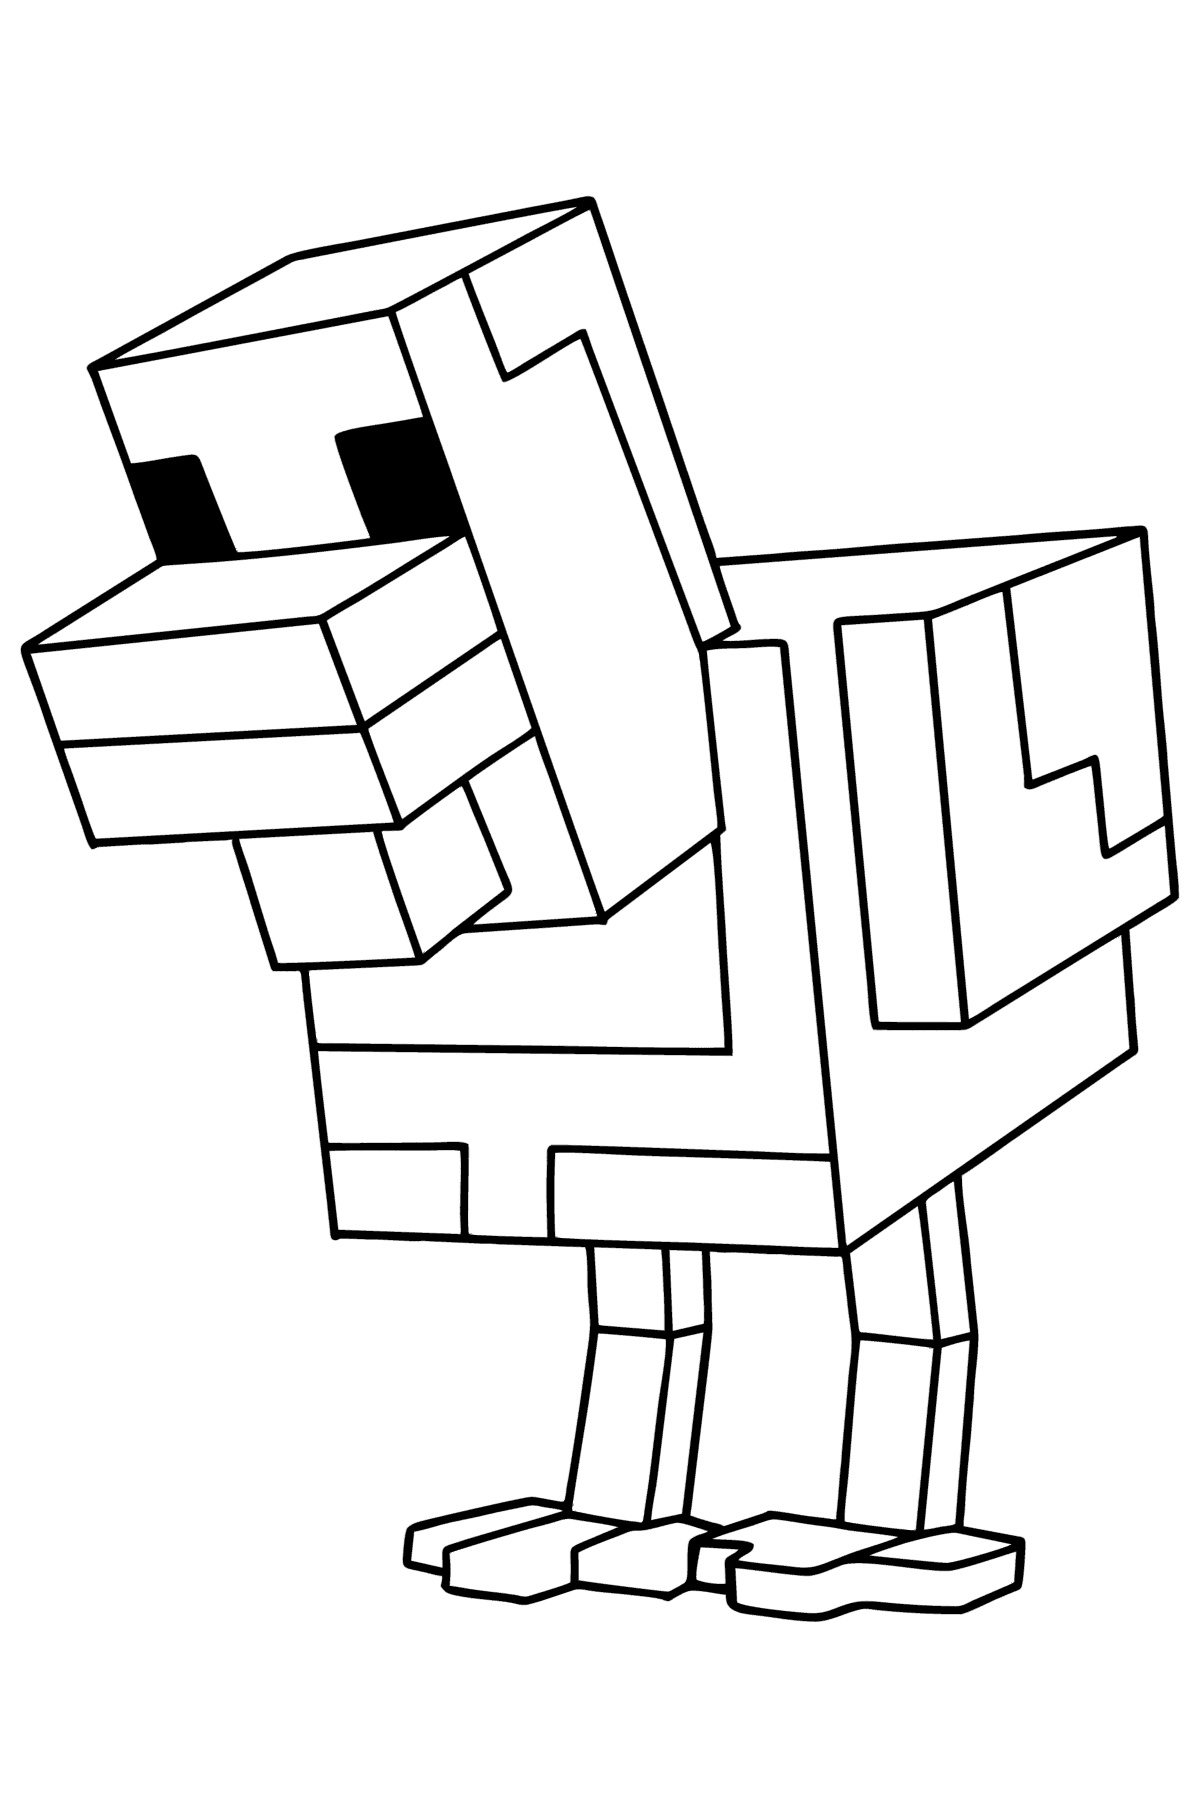 Minecraft Chicken coloring page - Coloring Pages for Kids